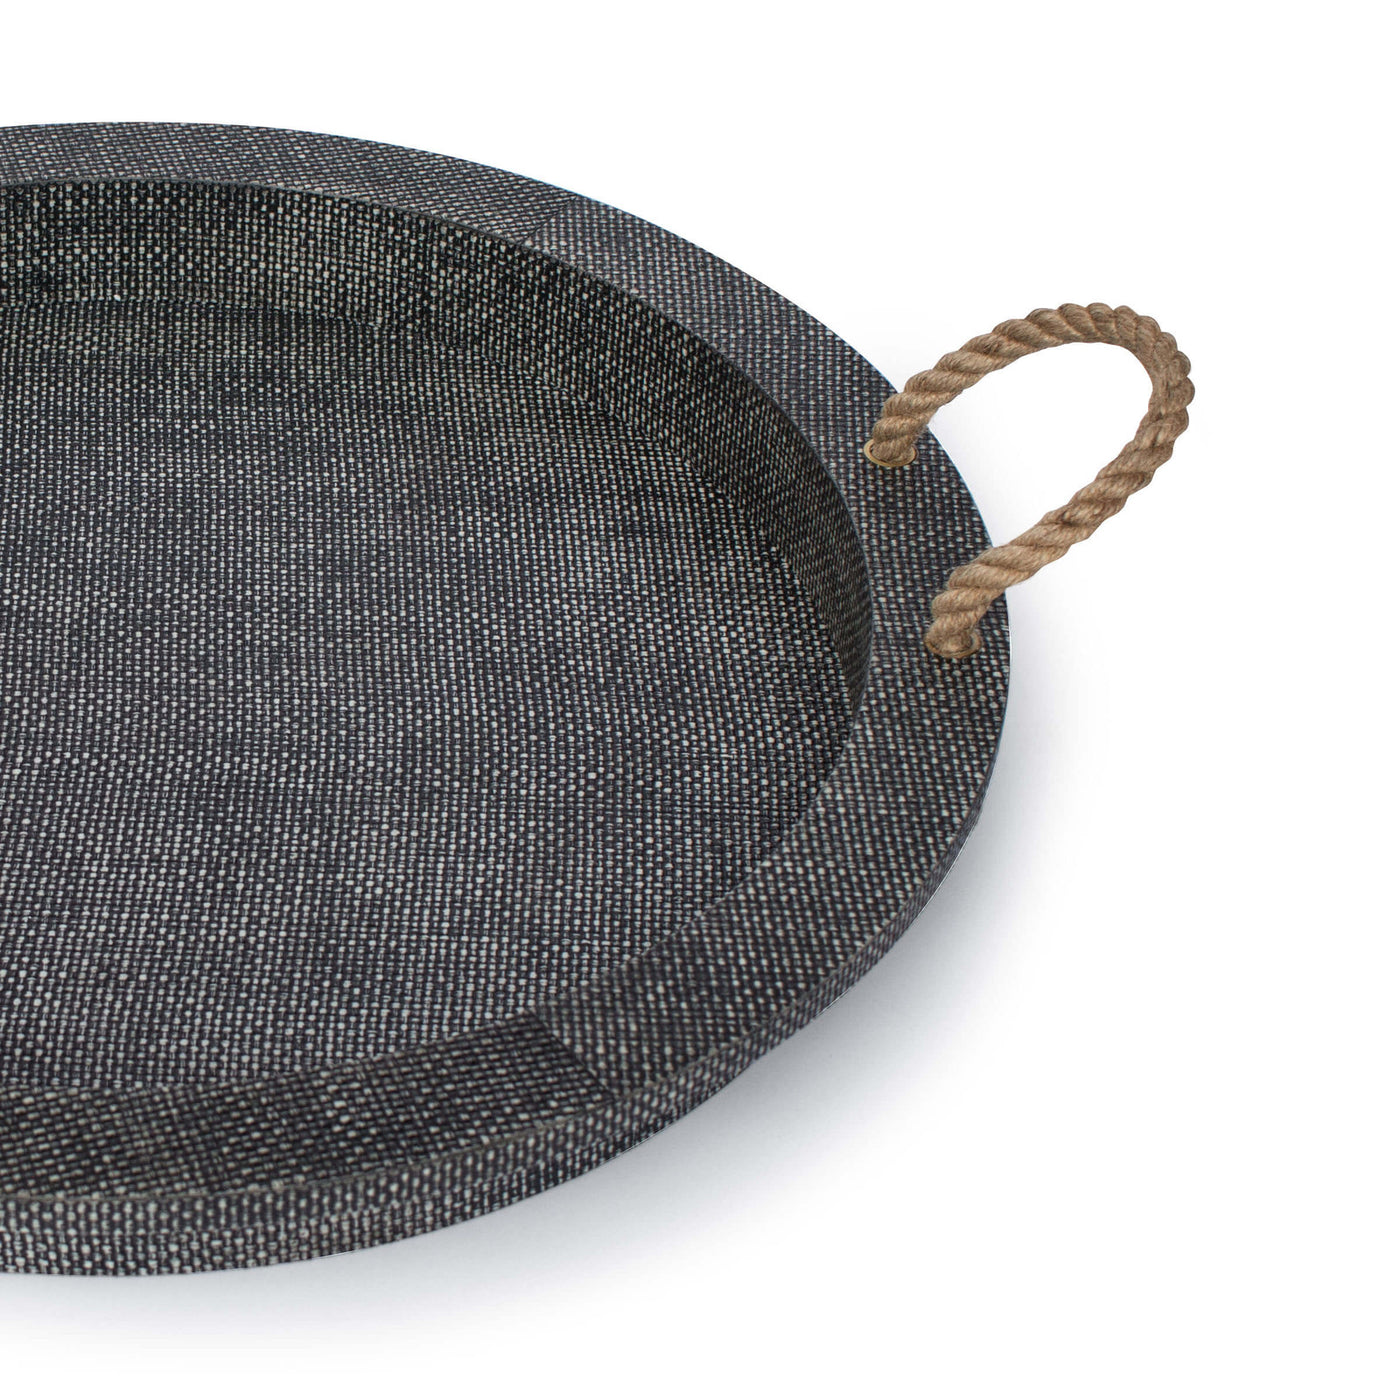 TRAY RATTAN WITH ROPE HANDLES ROUND (Available in 2 Colors)